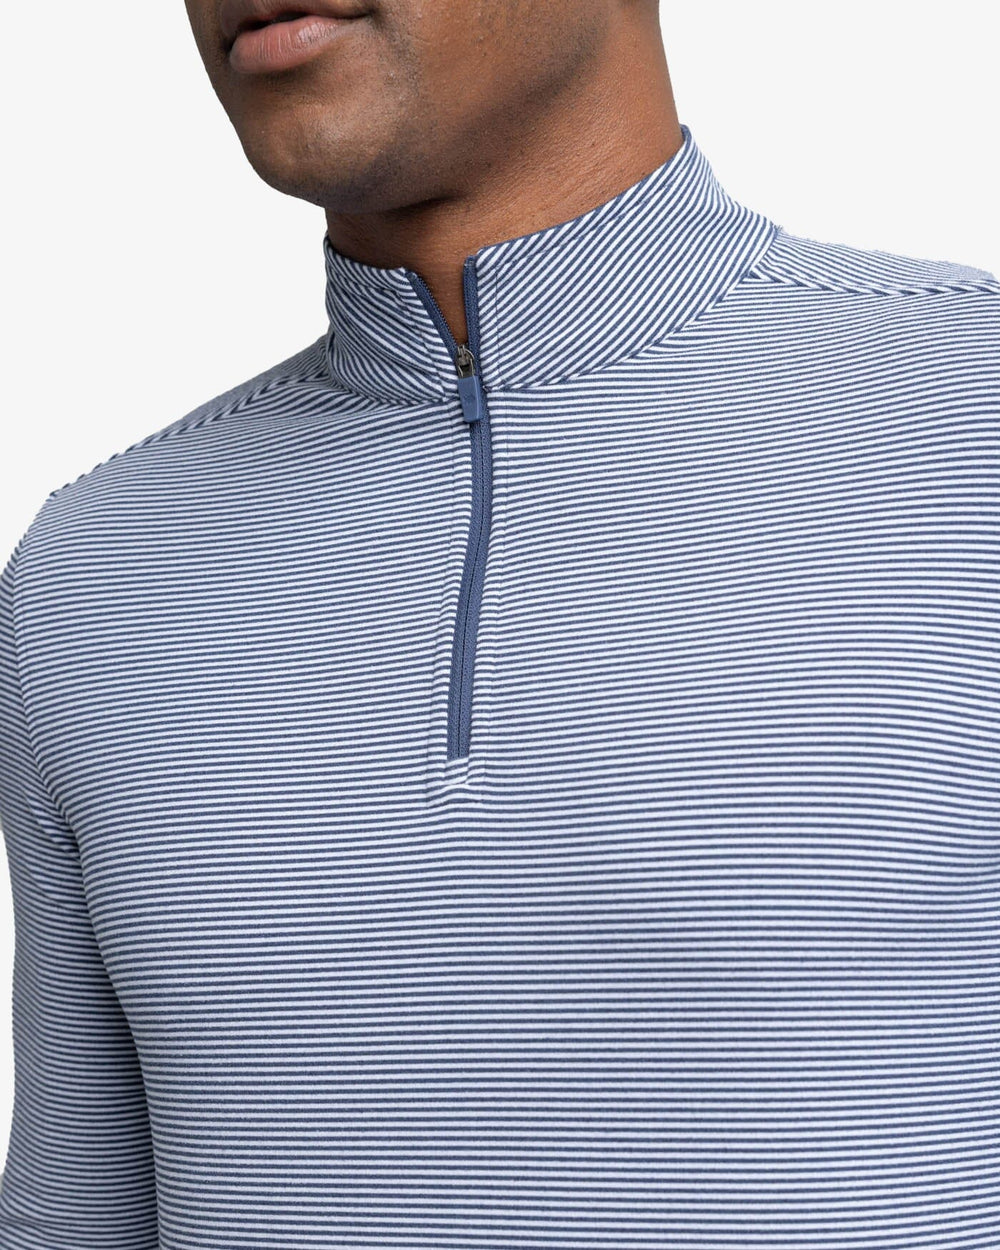 The detail view of the Southern Tide Cruiser Micro-Stripe Heather Quarter Zip by Southern Tide - Heather Navy